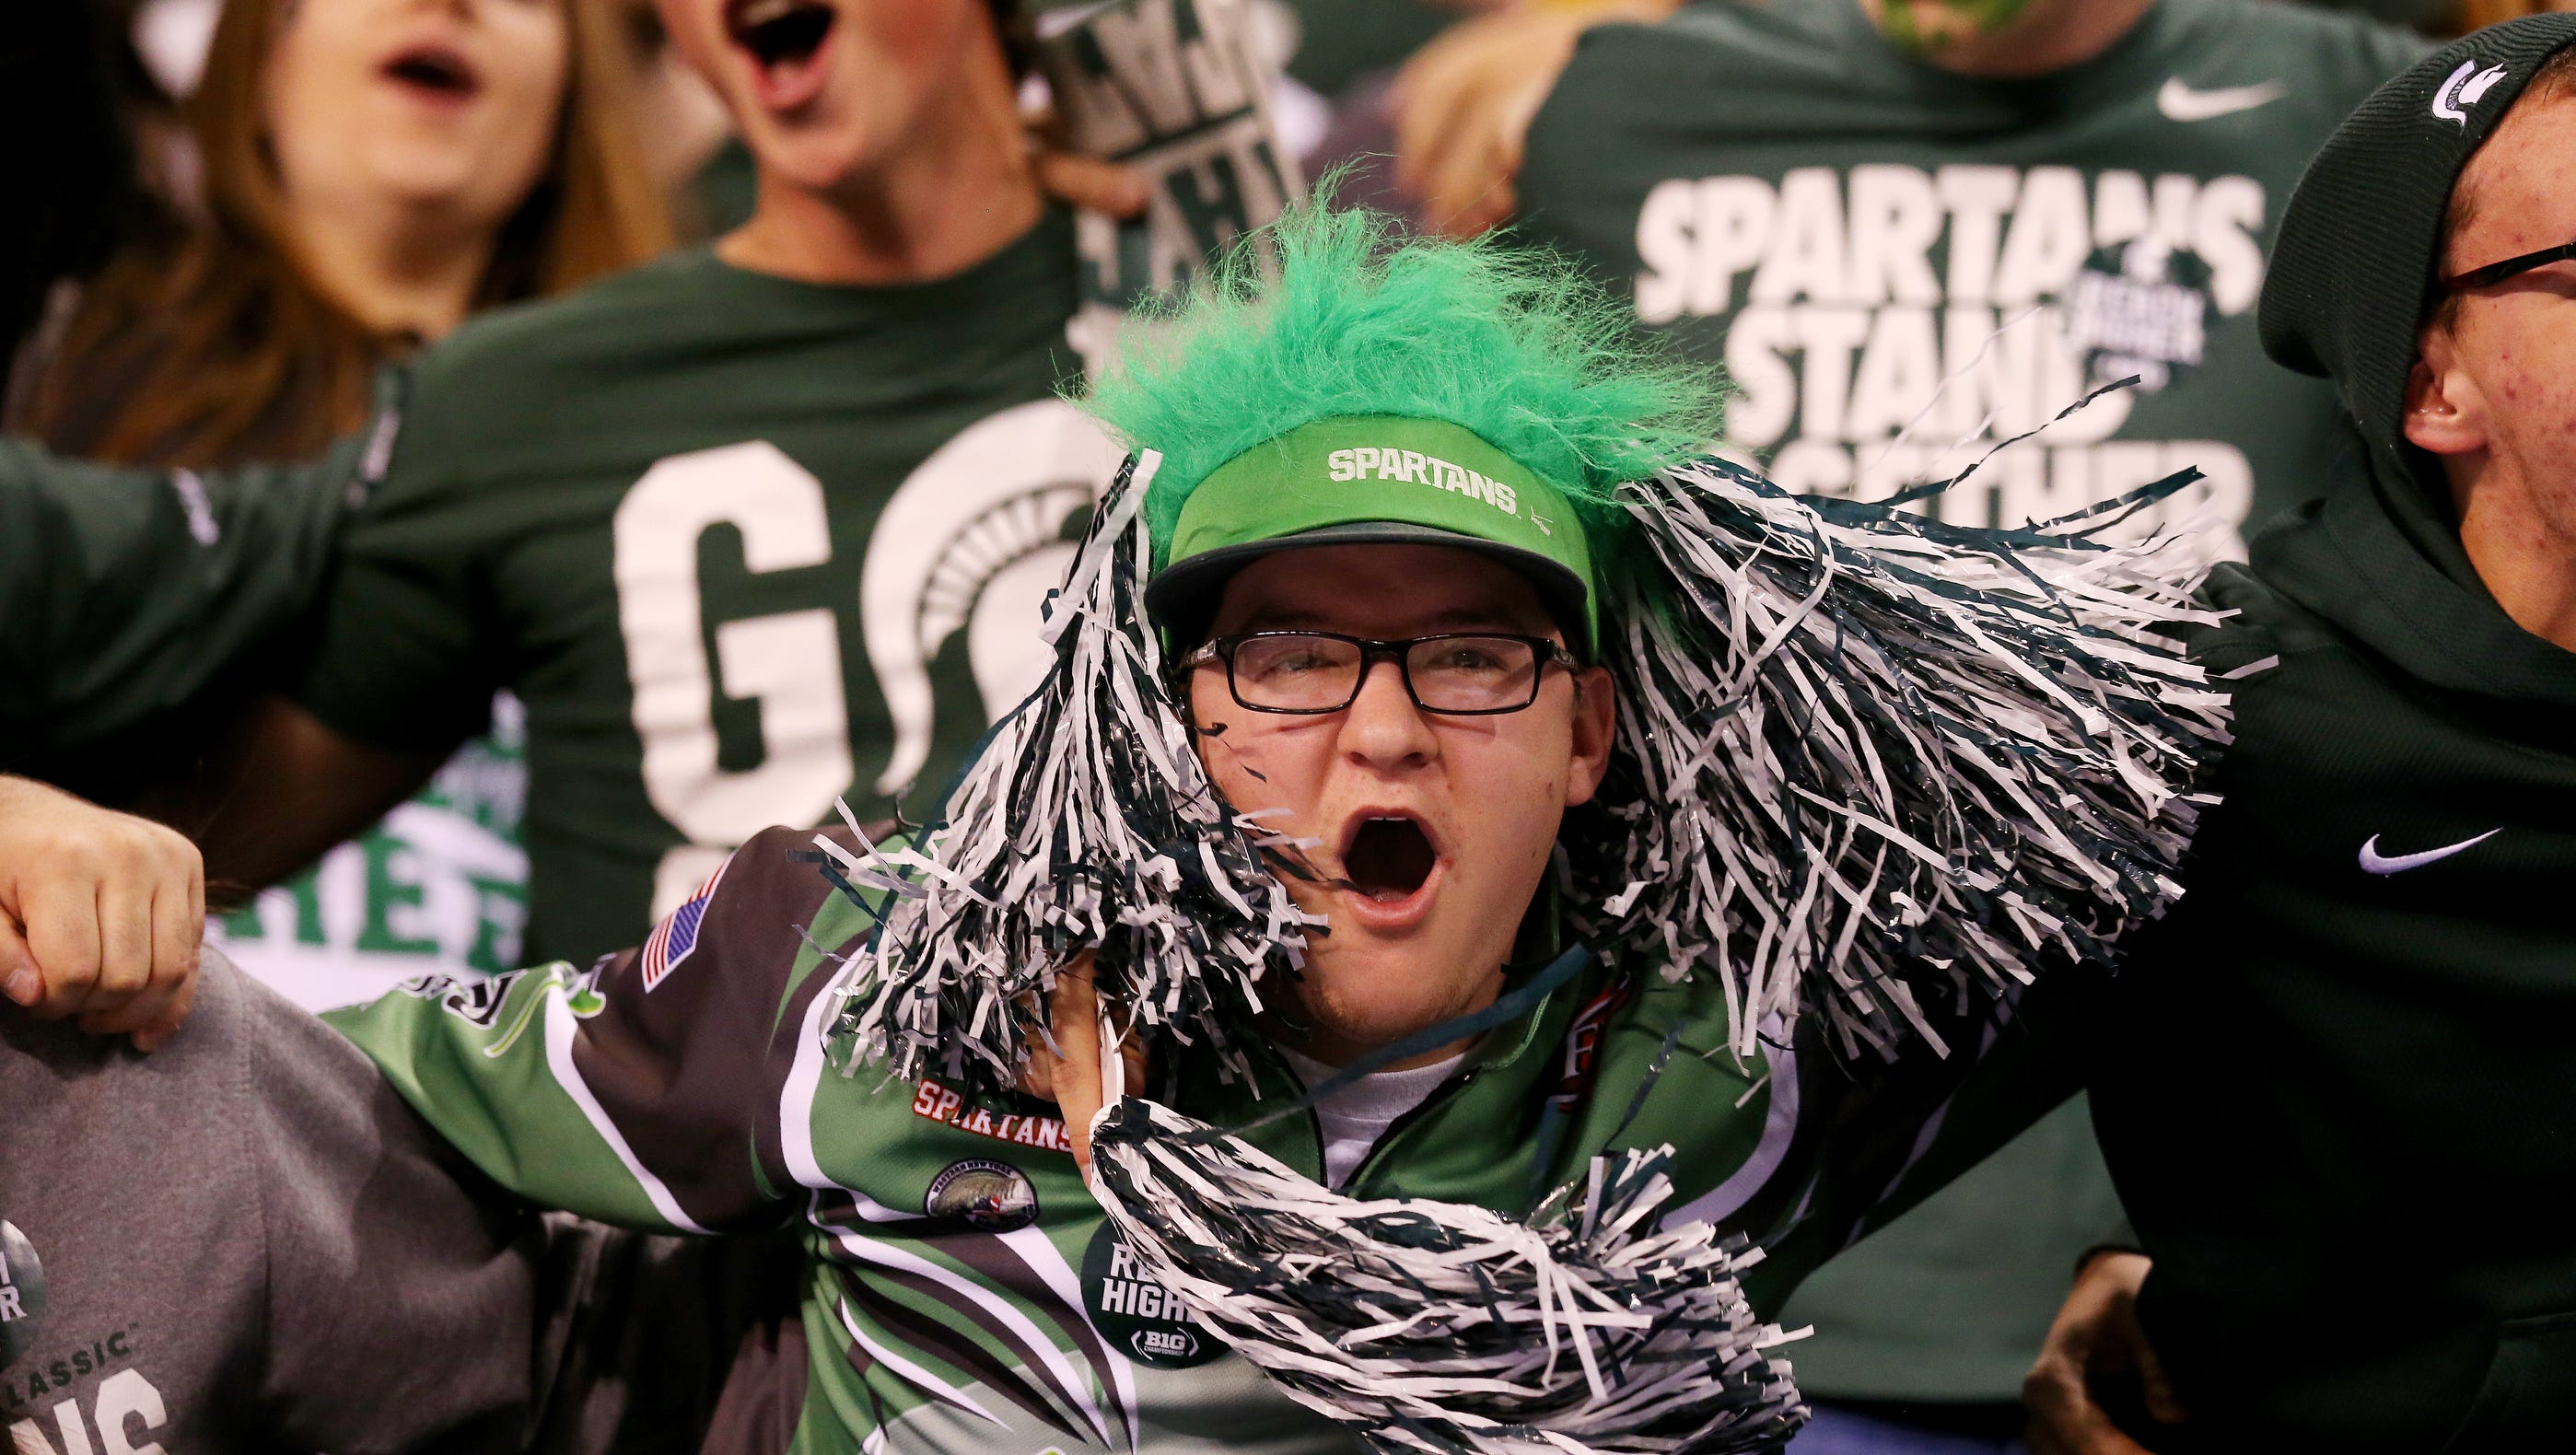 A Michigan State fan gets excited as the team enters the field during the Big Ten Championship Game at Lucas Oil Stadium on Dec. 5, 2015.